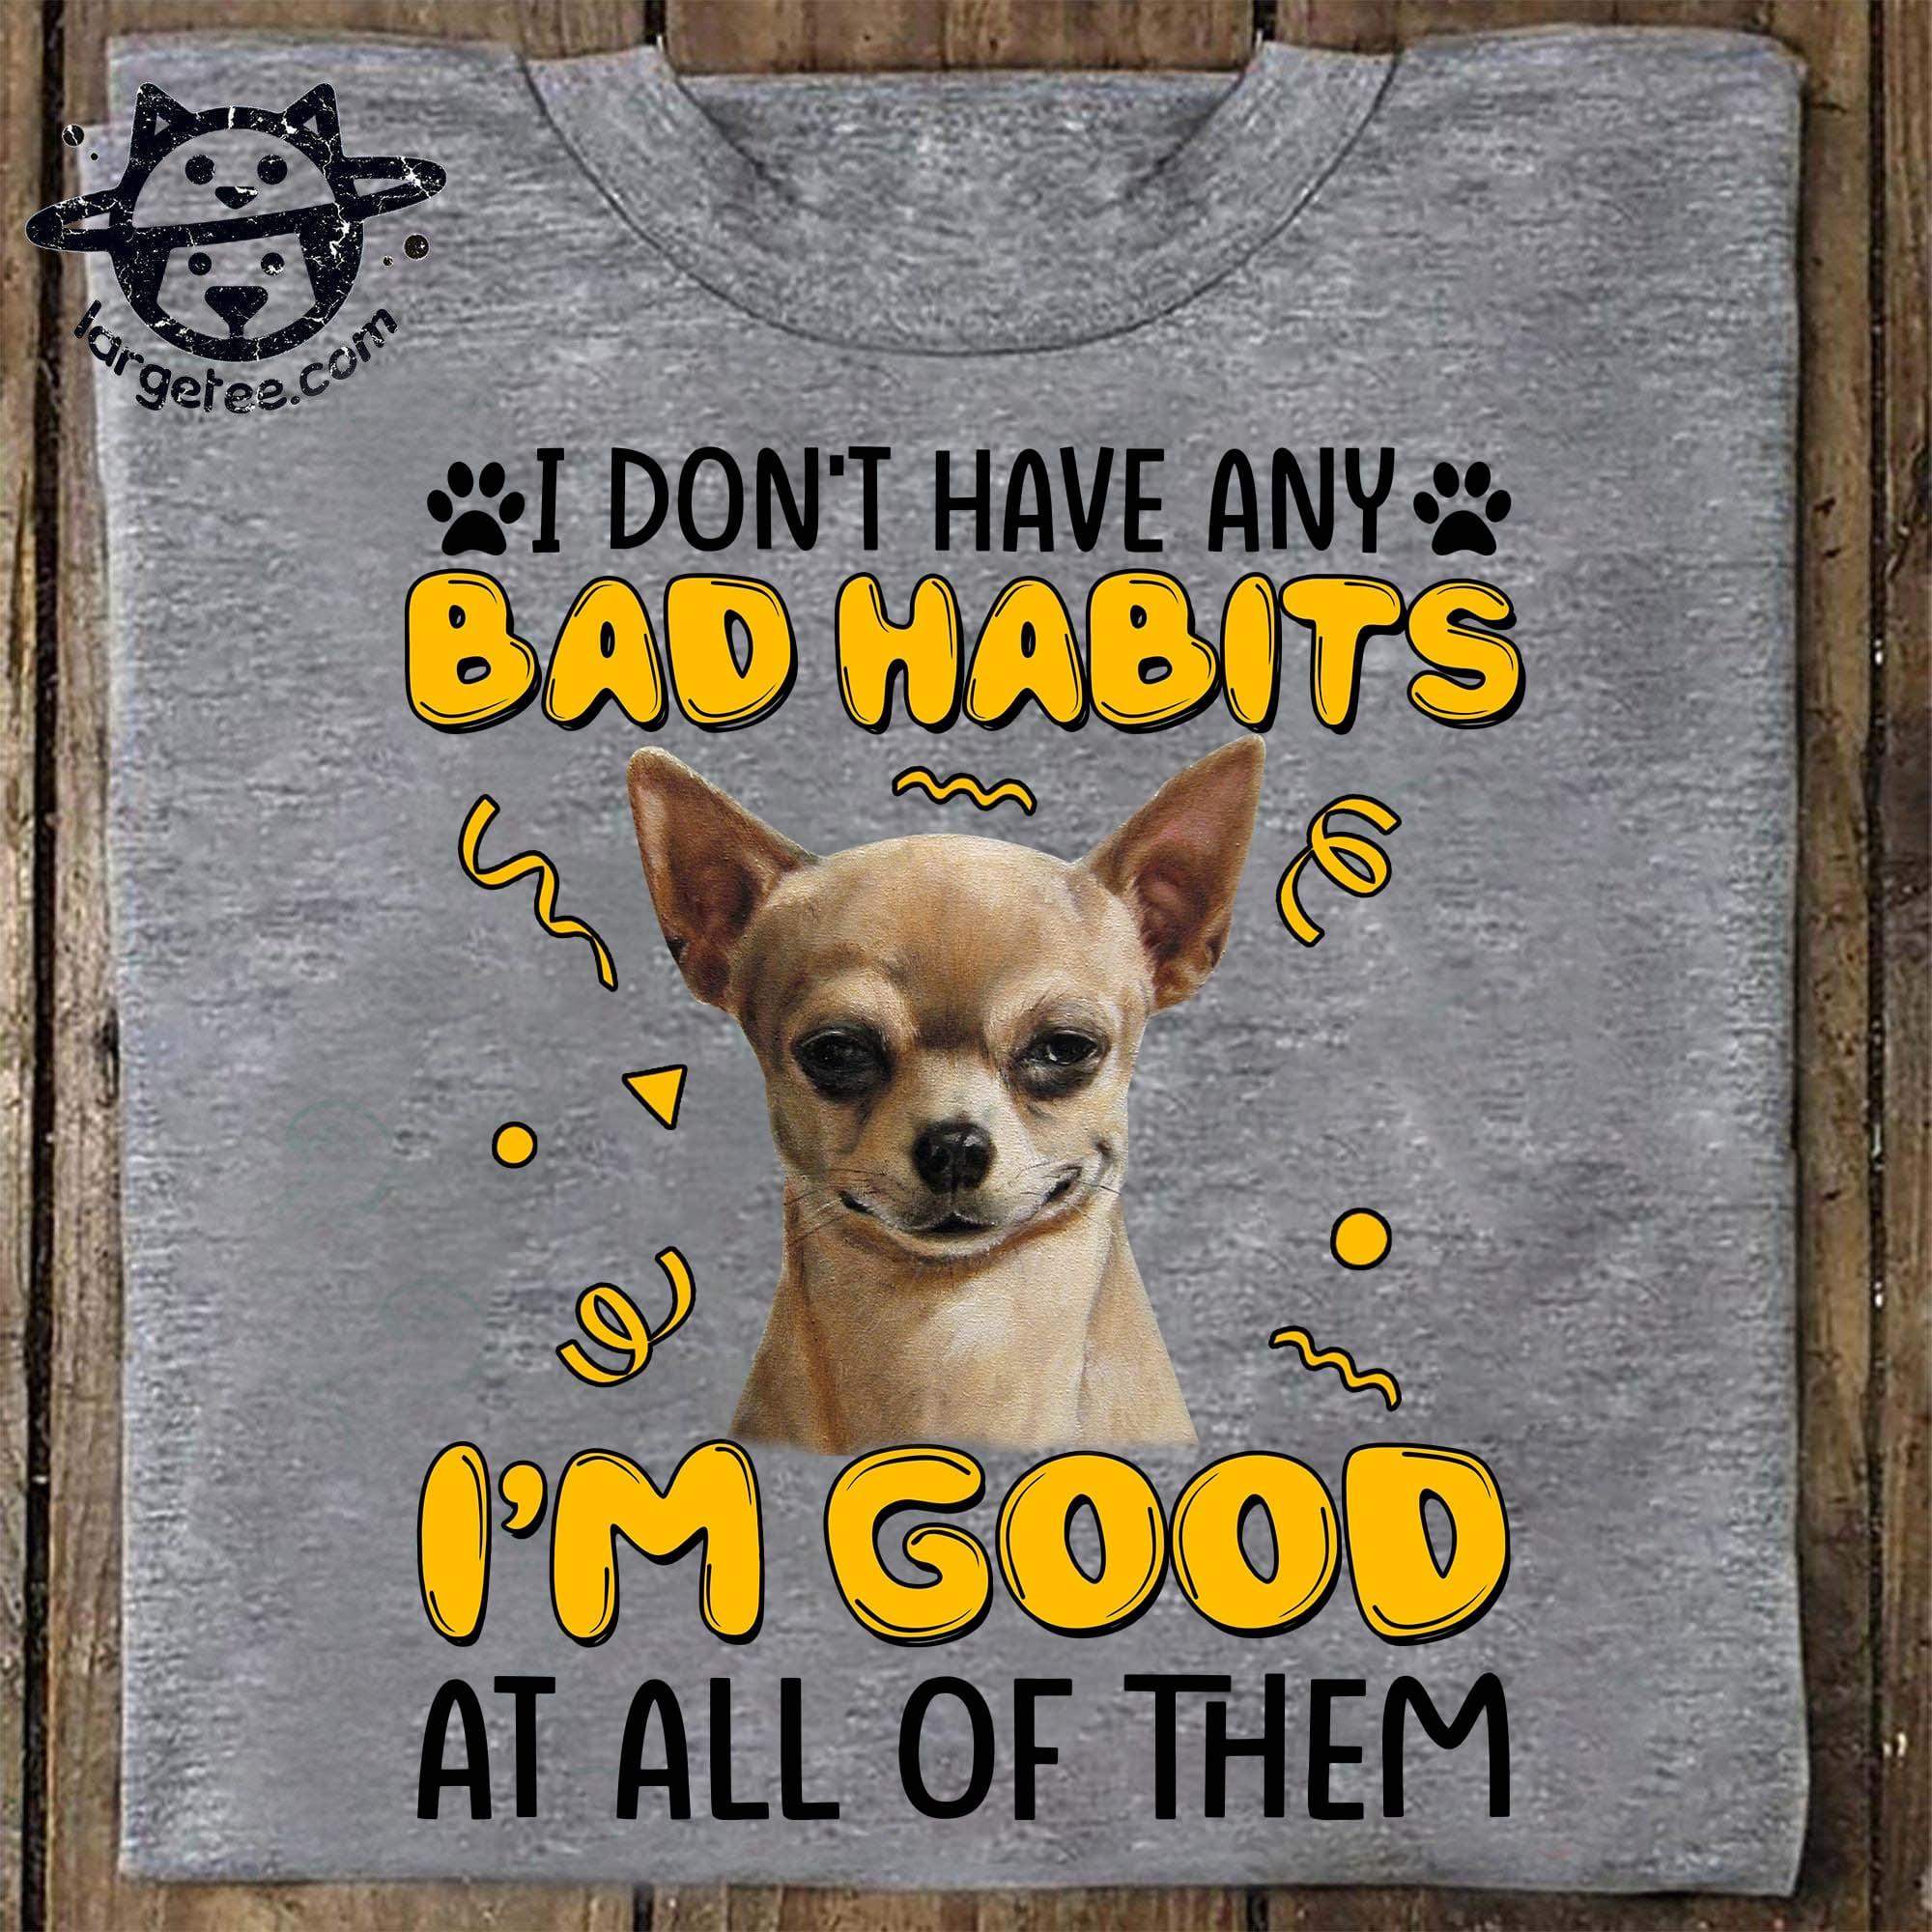 I don't have any bad habits I'm good at all of them - Dog lover gift, Chihuahua graphic T-shirt